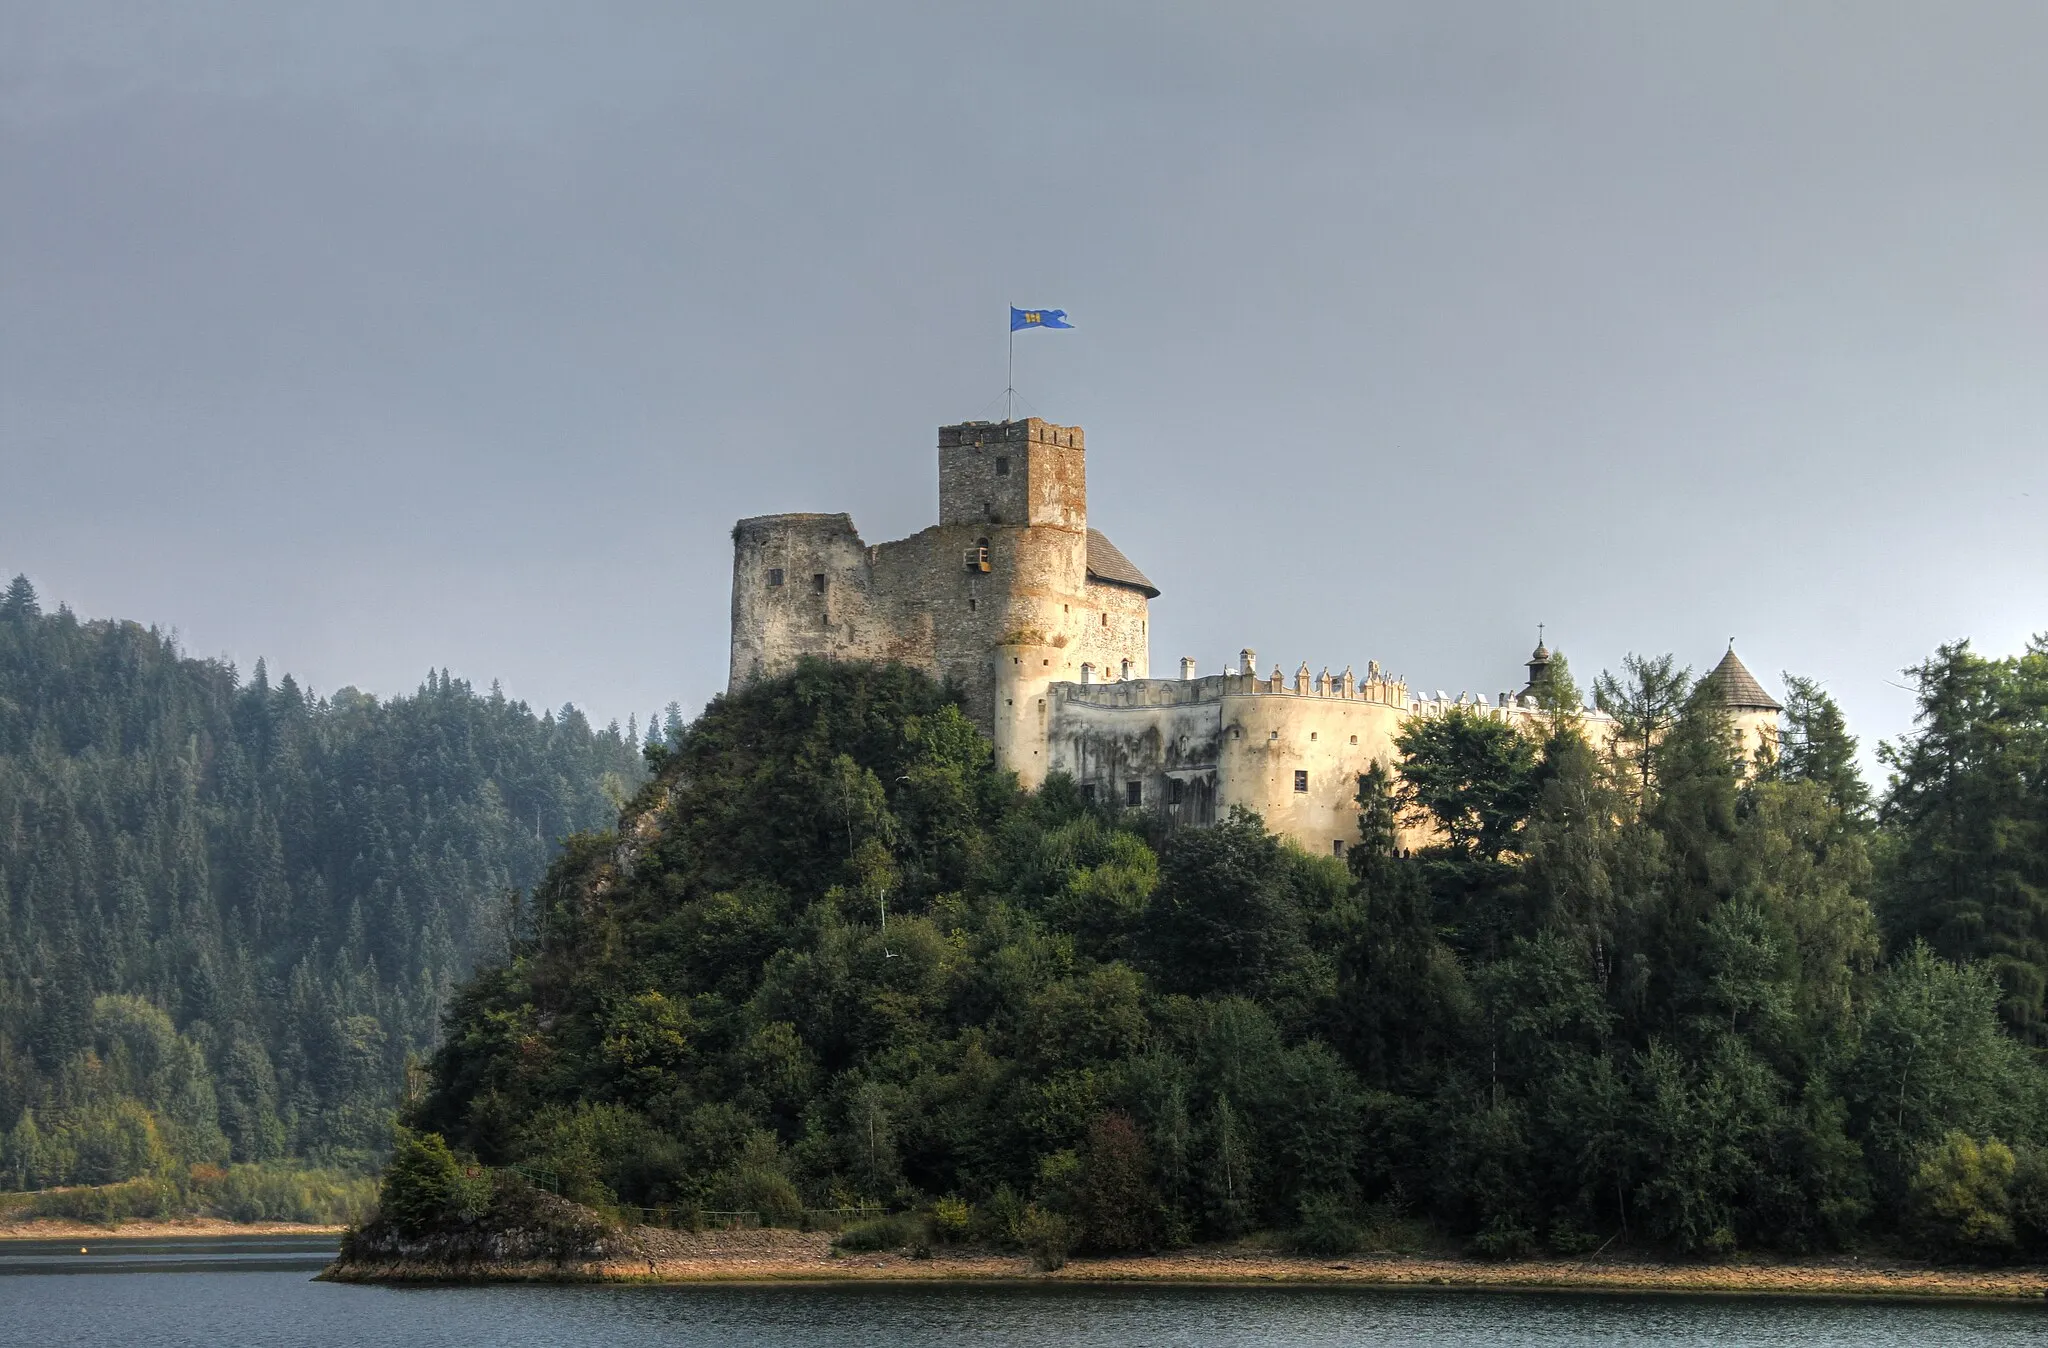 Photo showing: The castle of Niedzica at lake Czorsztyn of the southeastern Poland... According to the local legends it is a haunted castle...

The White Lady